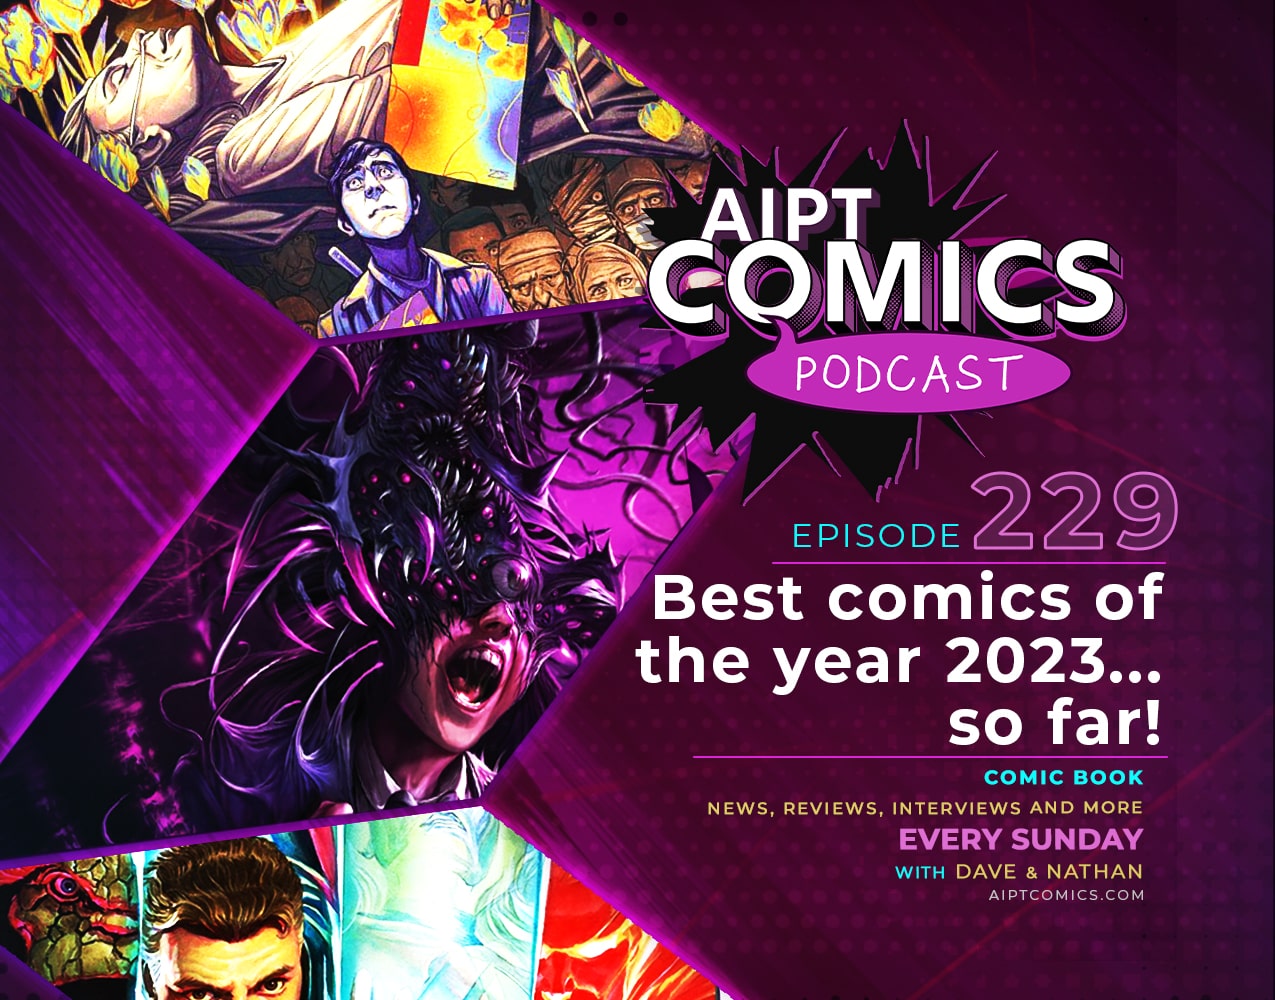 AIPT Comics Podcast episode 229: Best comics of the year 2023...so far